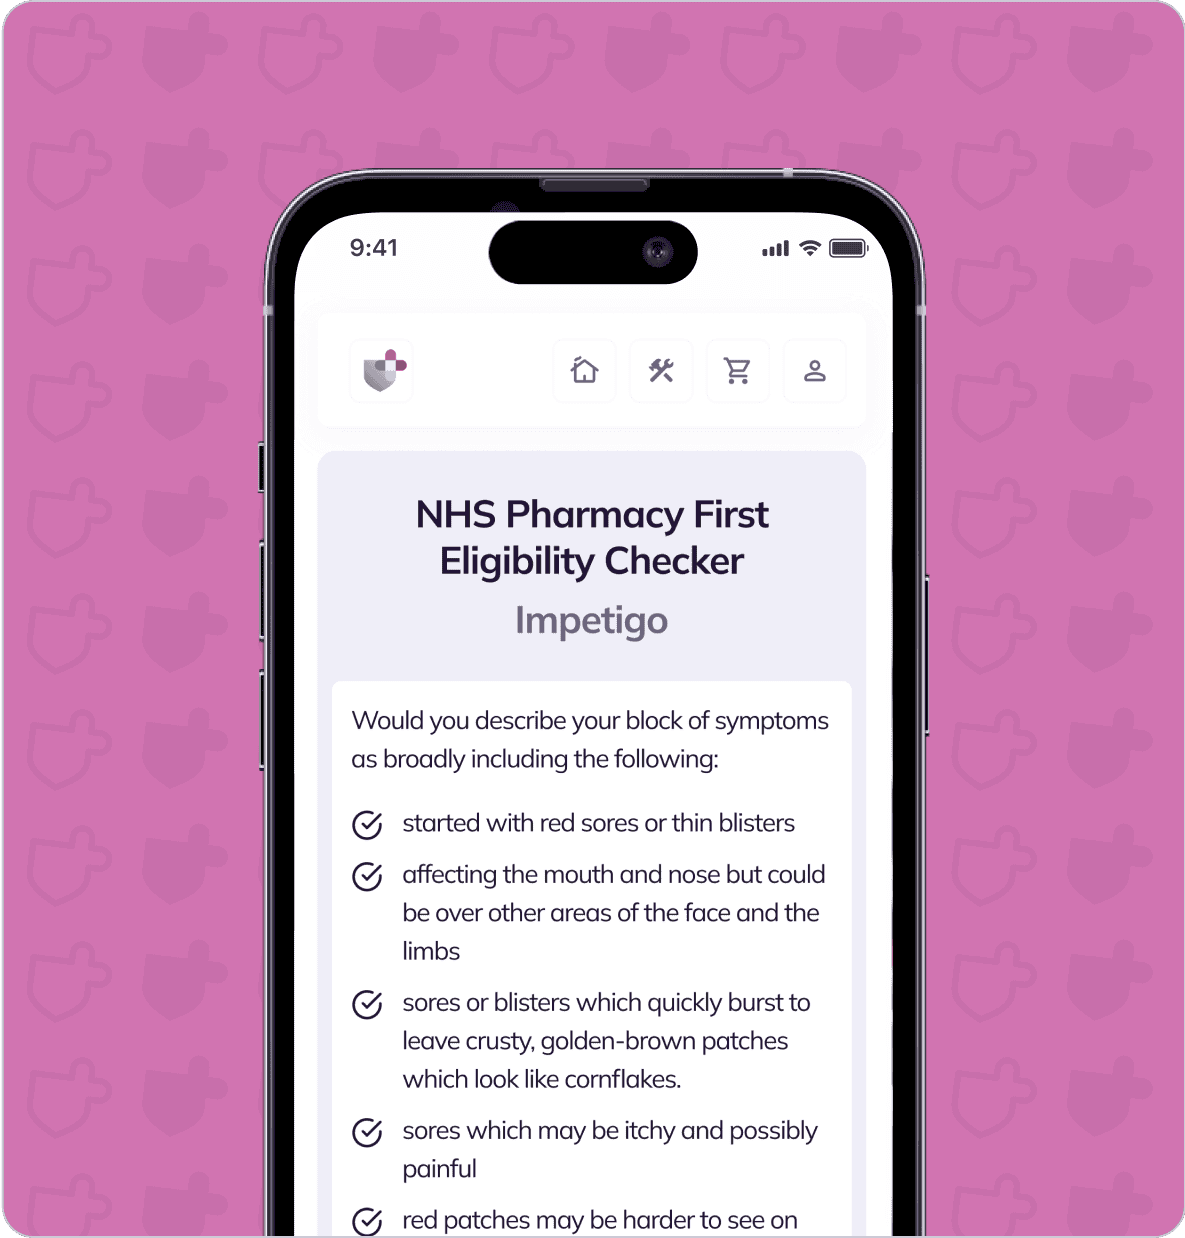 Smartphone displaying the NHS Pharmacy First Eligibility Checker app, currently showing information about impetigo symptoms and descriptions. Background features a pattern of shield icons.